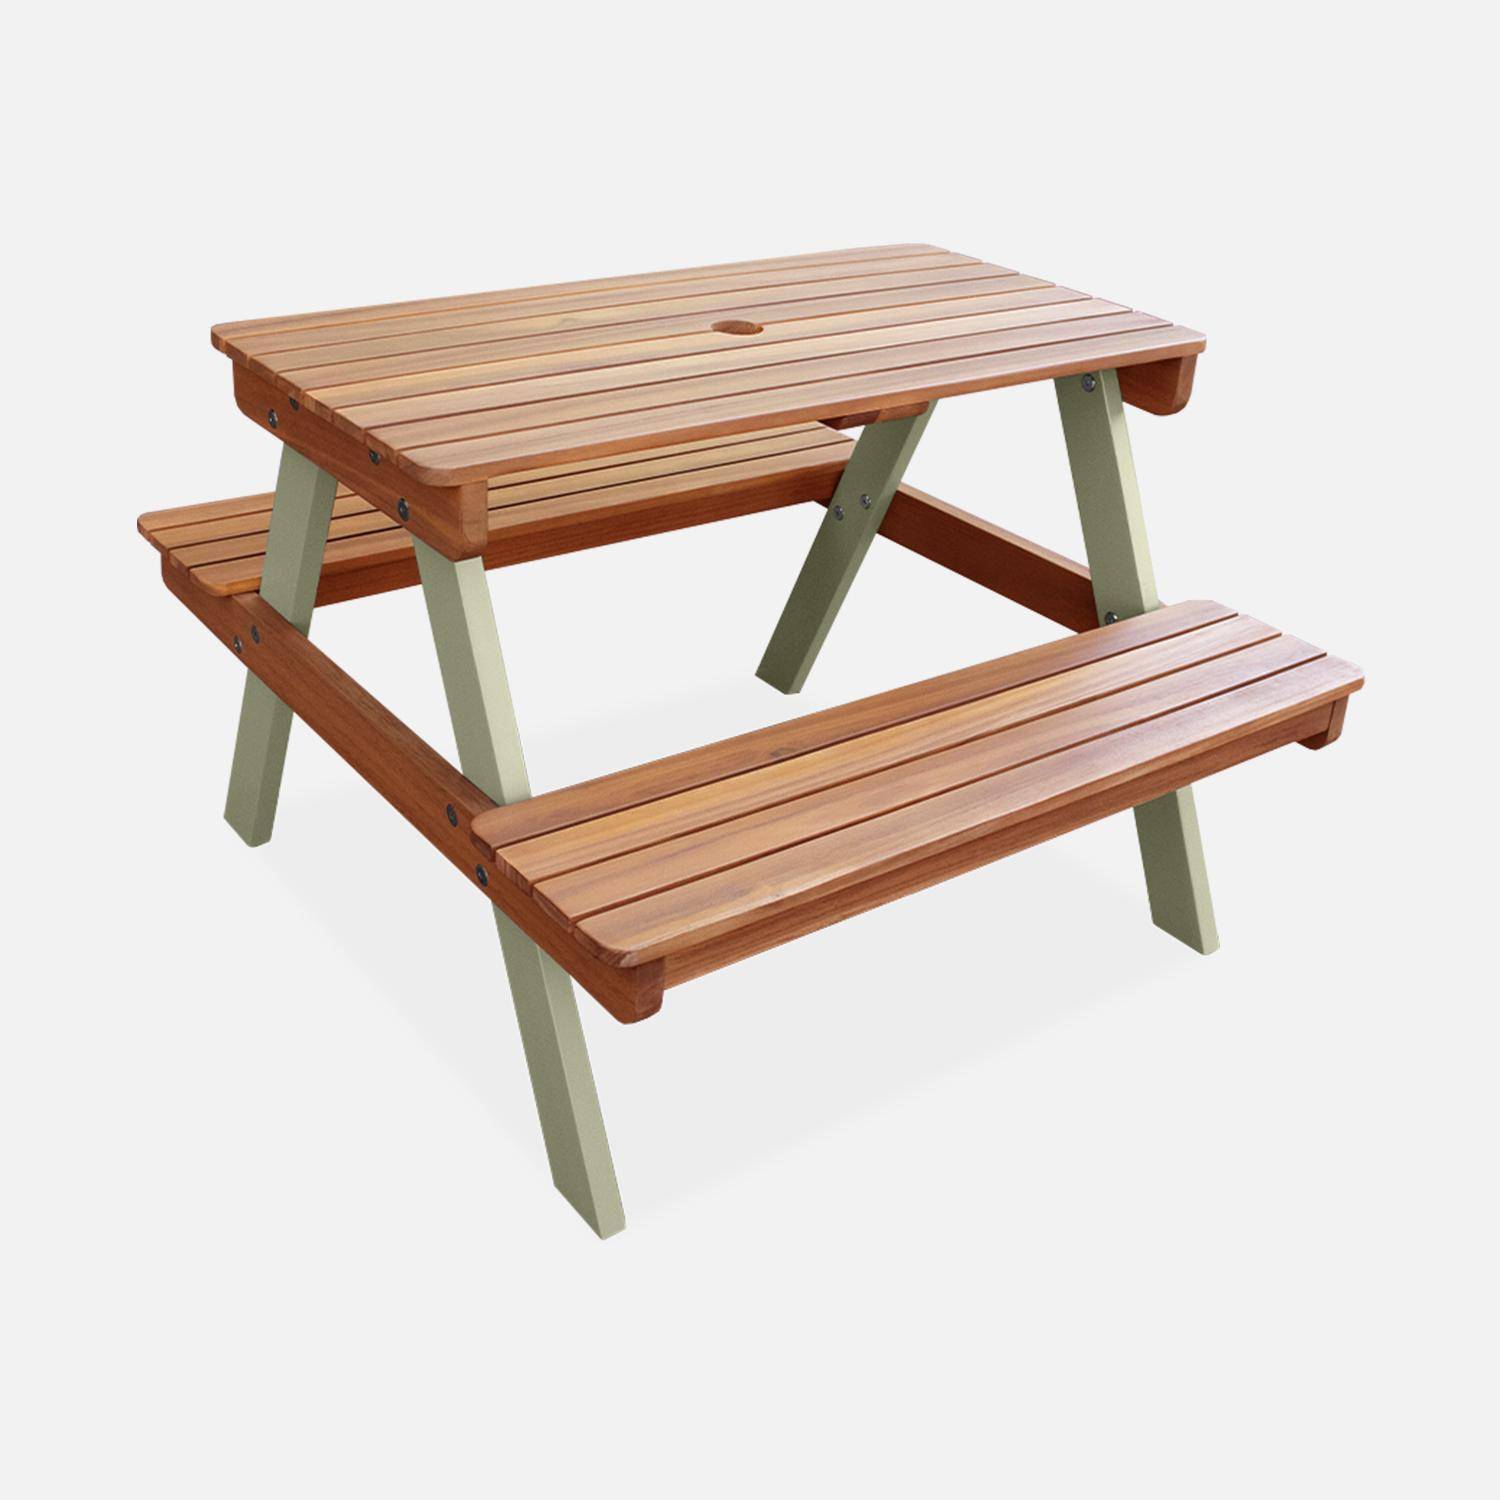 Acacia wood picnic table for children, 2 places, colour light teak and grey green,sweeek,Photo3